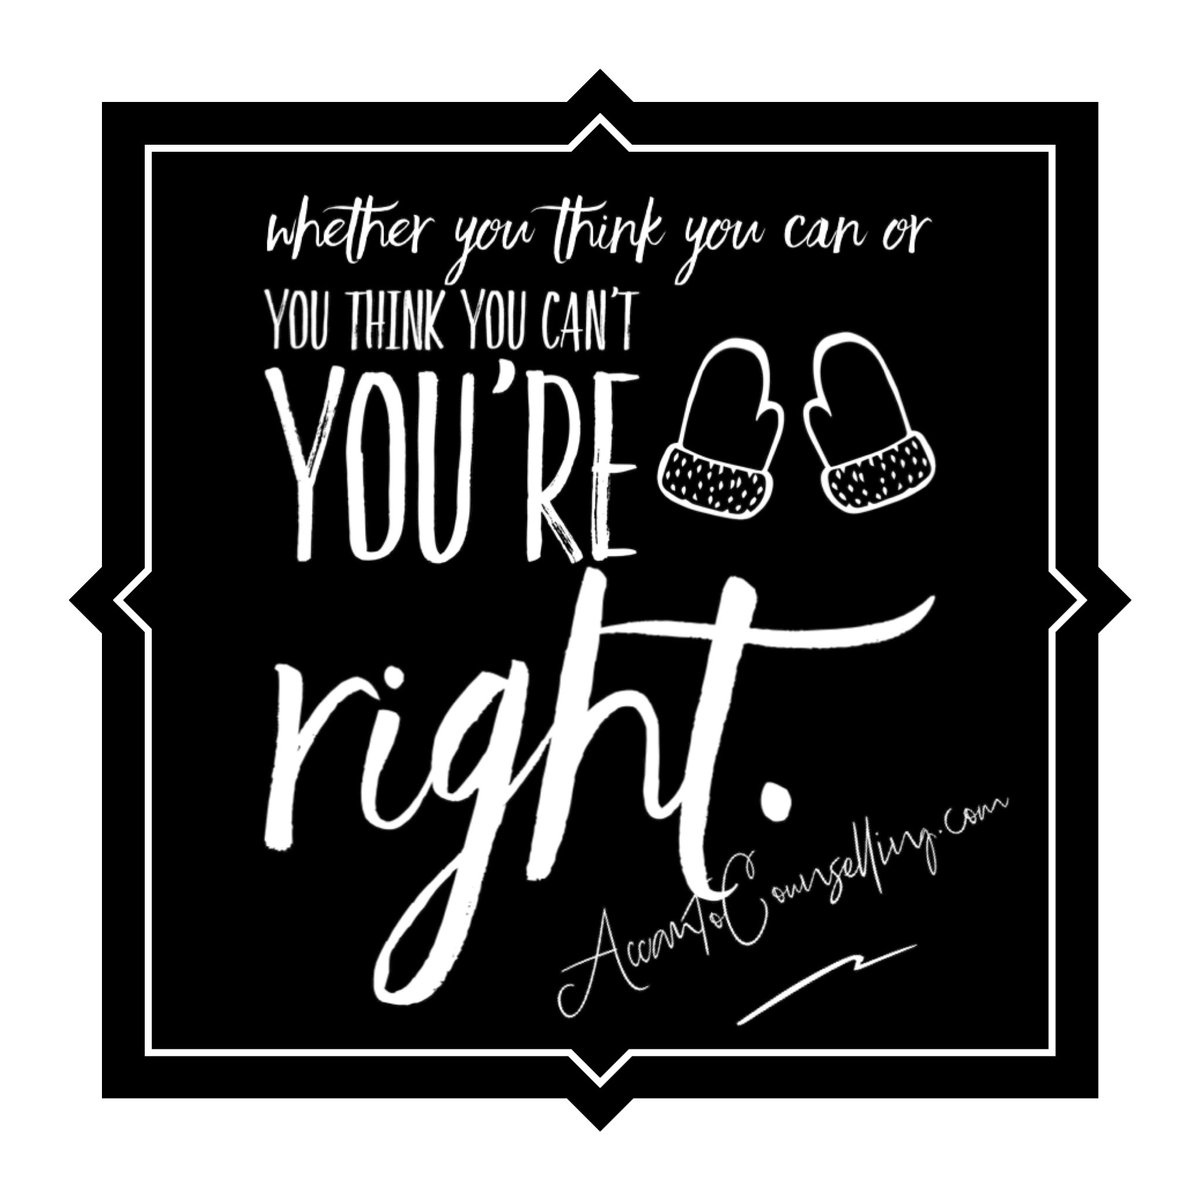 #YouAreRight